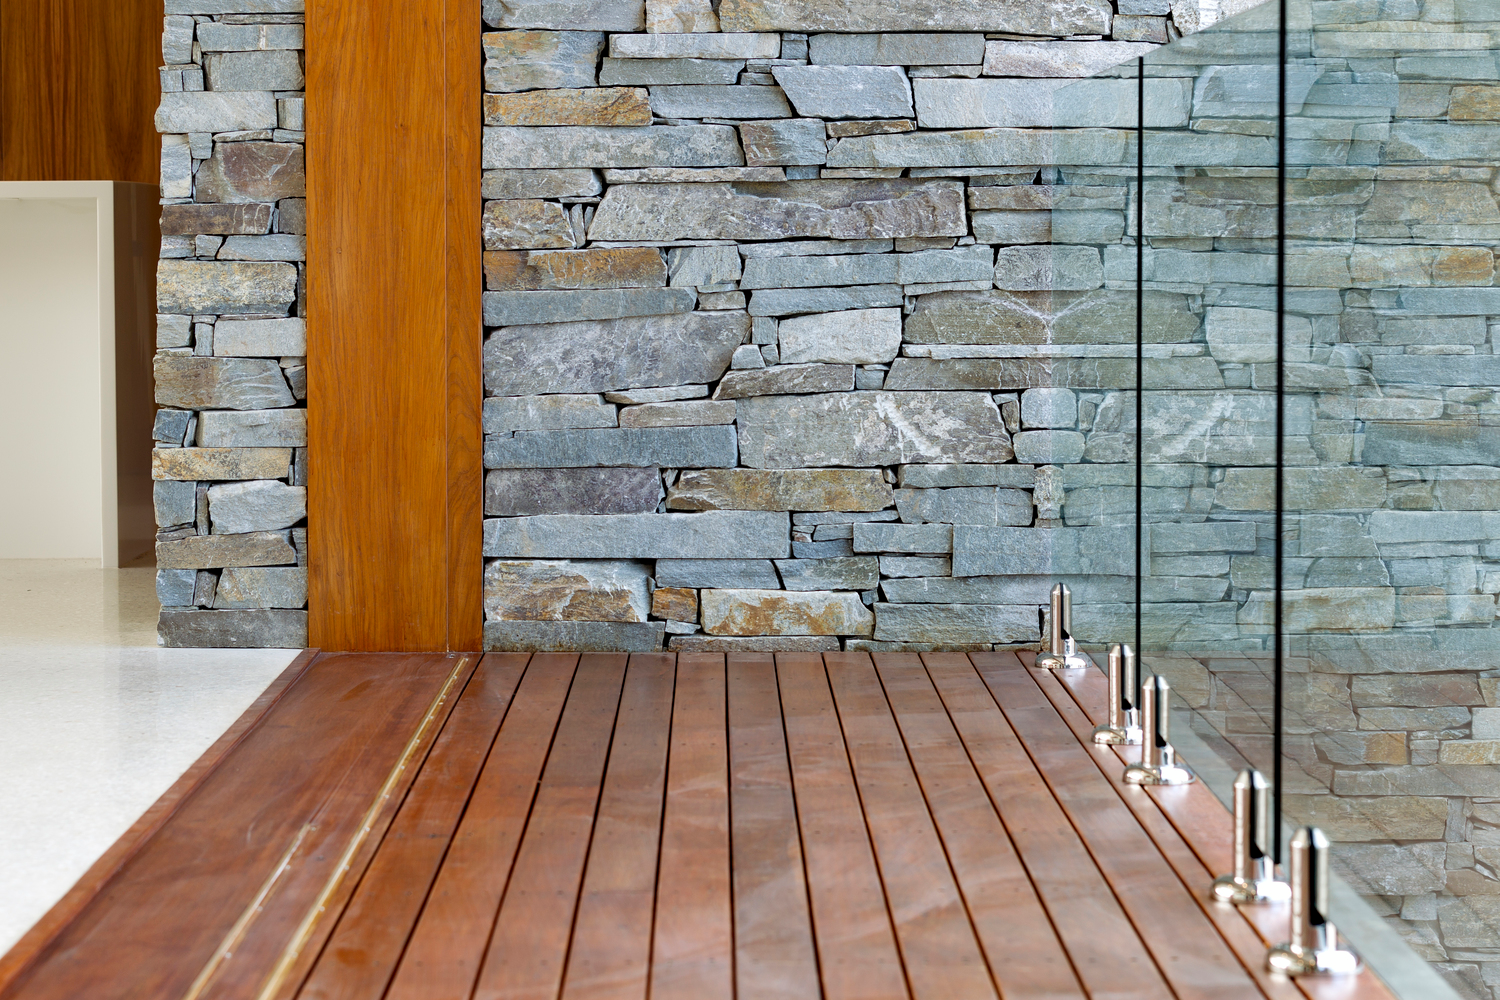 The Baw Baw dry stone walling seamlessly paired with timber